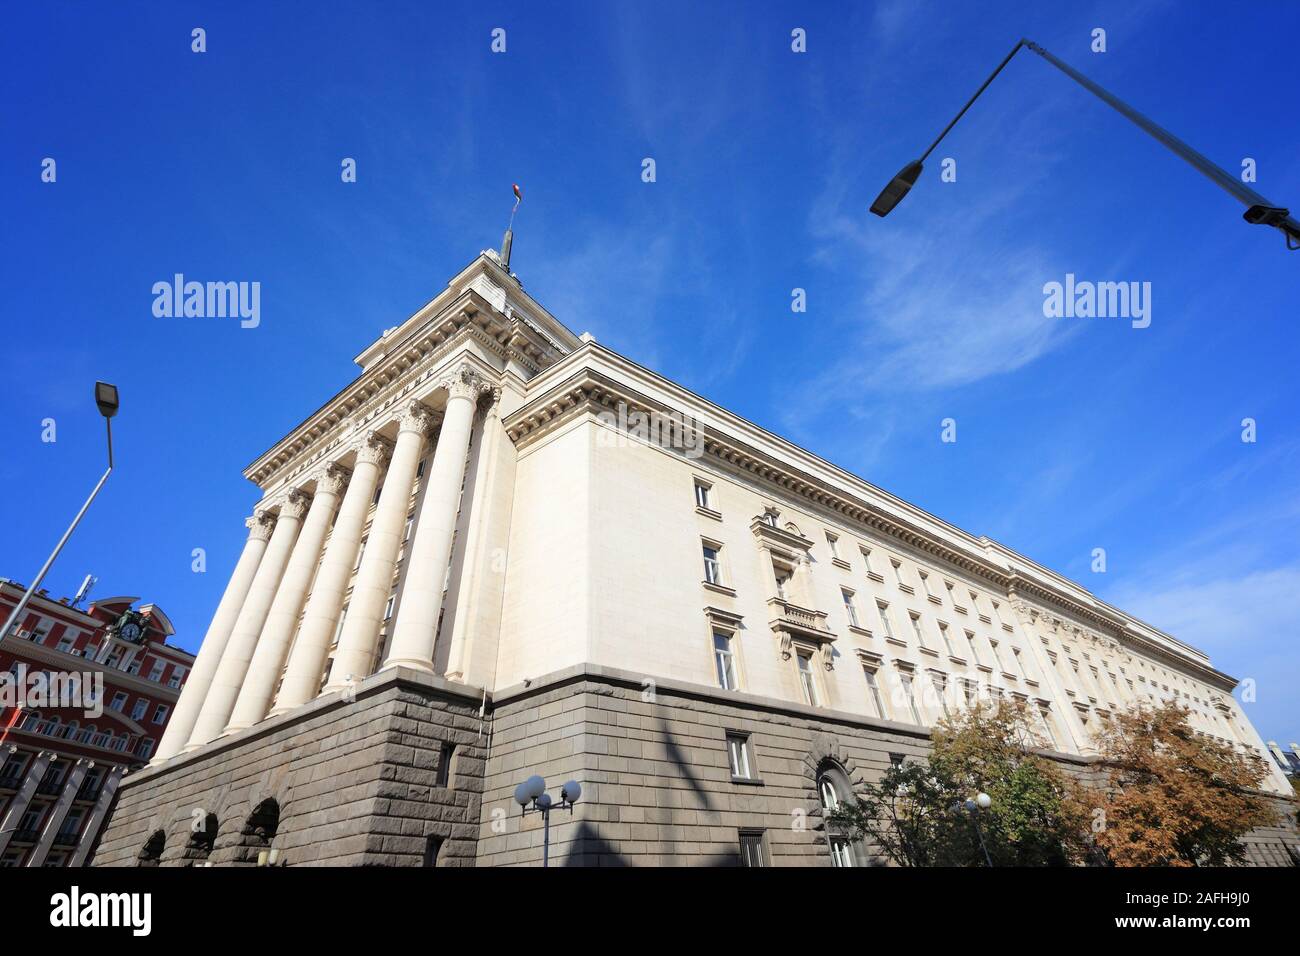 Bulgarian Parliament building in Sofia, the capital city. The text on the facade reads Narodno Sabranie (National Assembly). Stock Photo